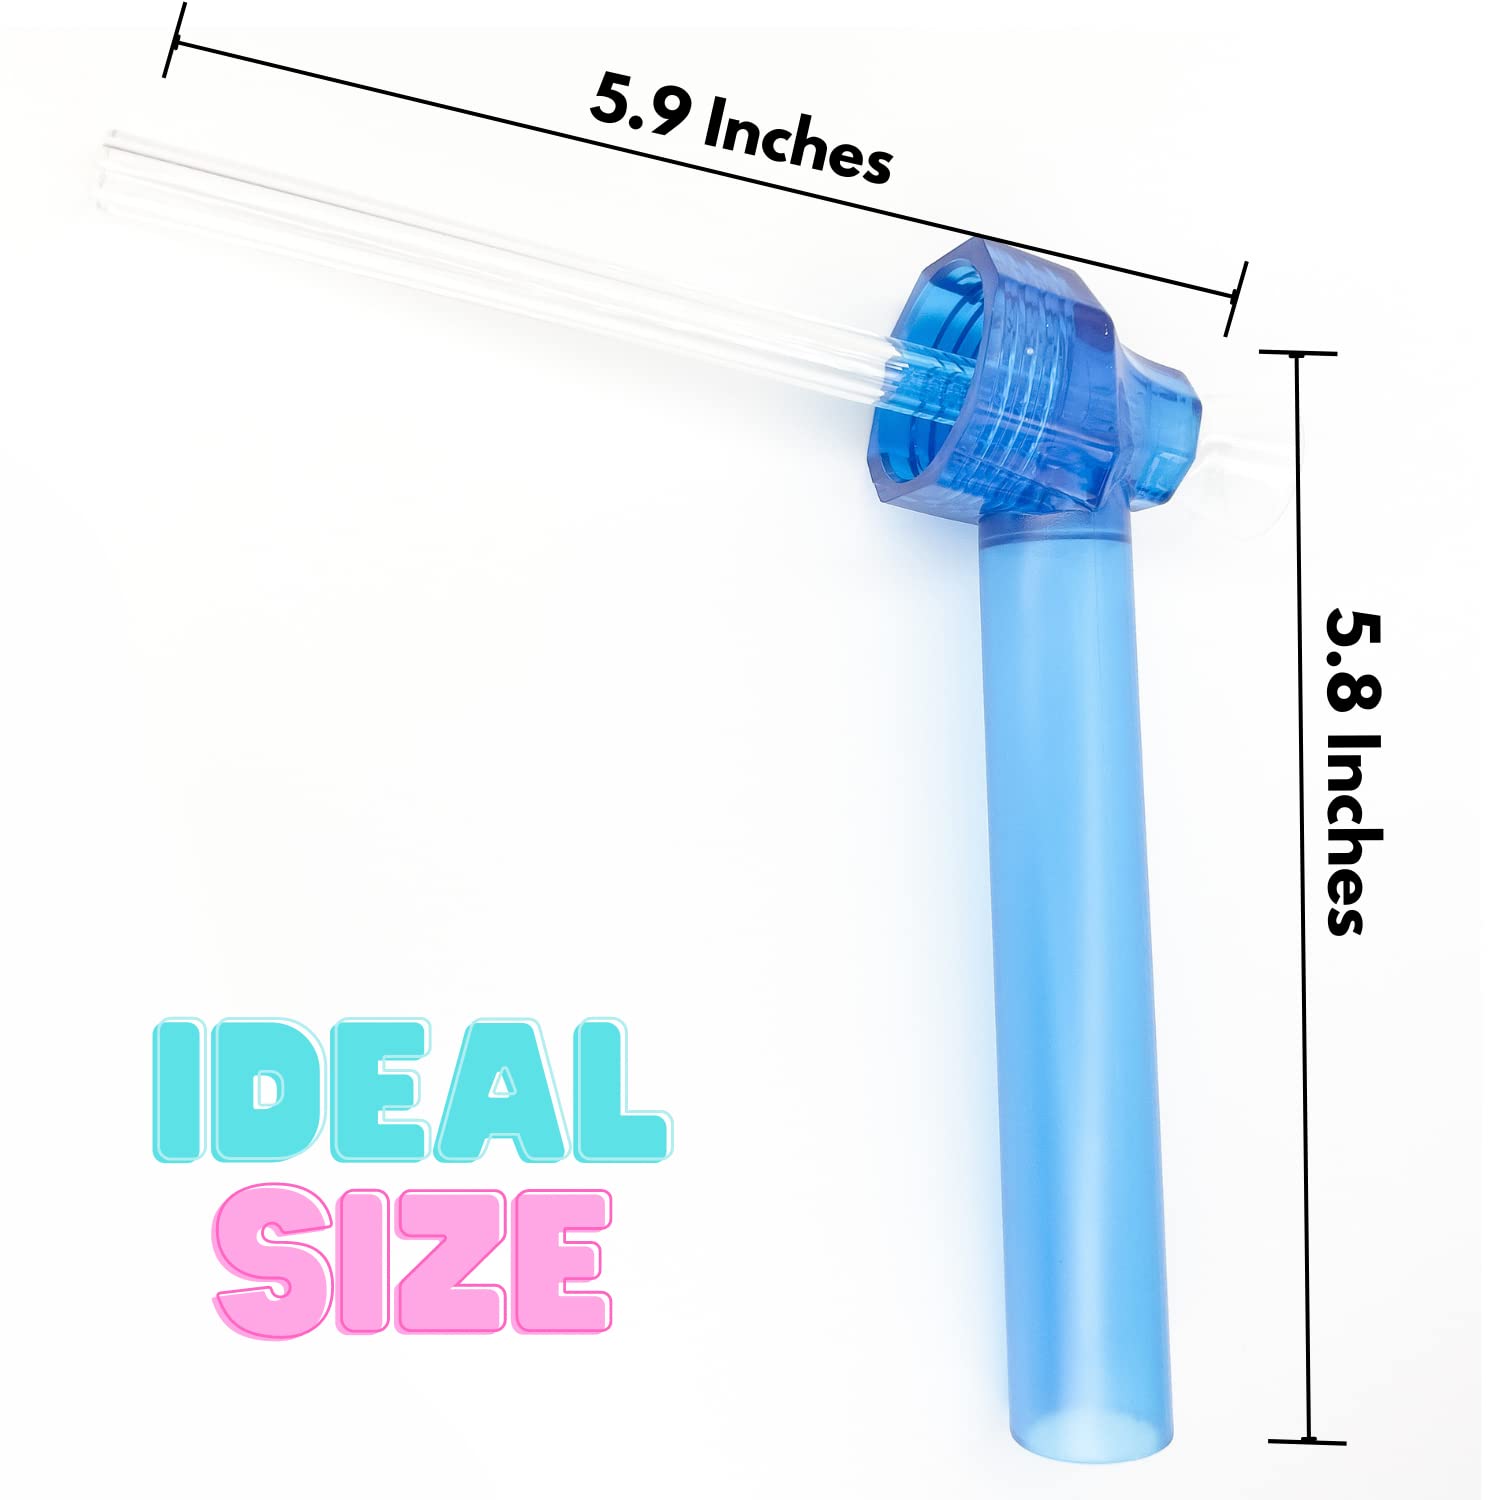 Reusable Staw on the Bottle, Portable Water Straw Kit (1 Pack)